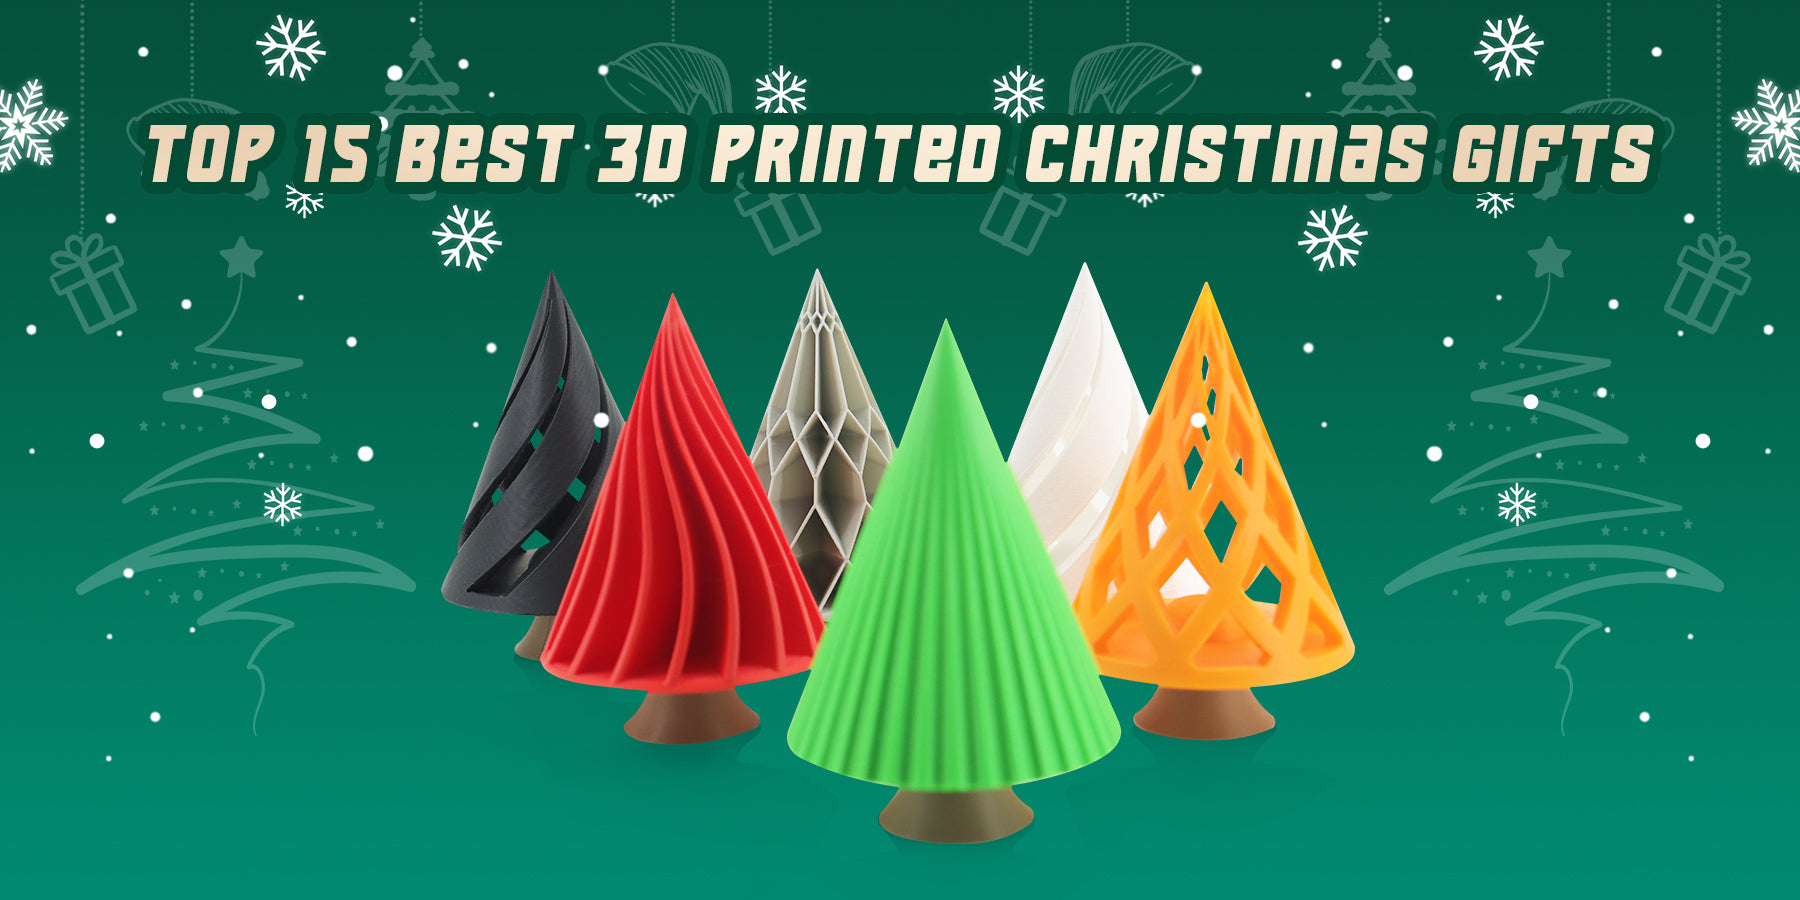 Top 15 Best 3D Printed Christmas Gifts